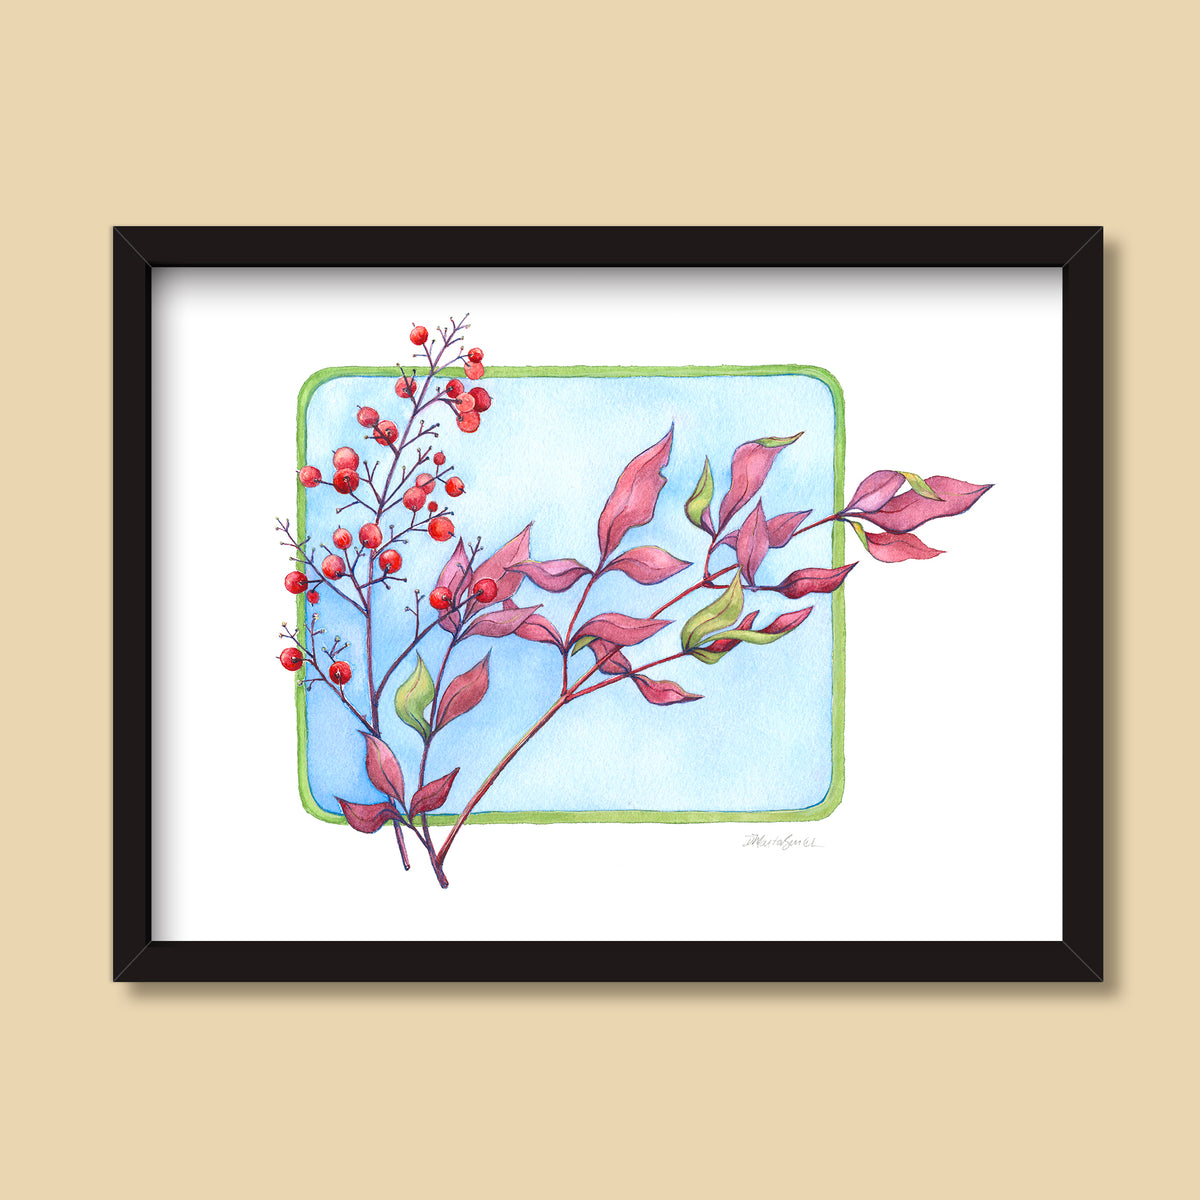 Heavenly Bamboo | Watercolor Painting by Denise Marta-Burch